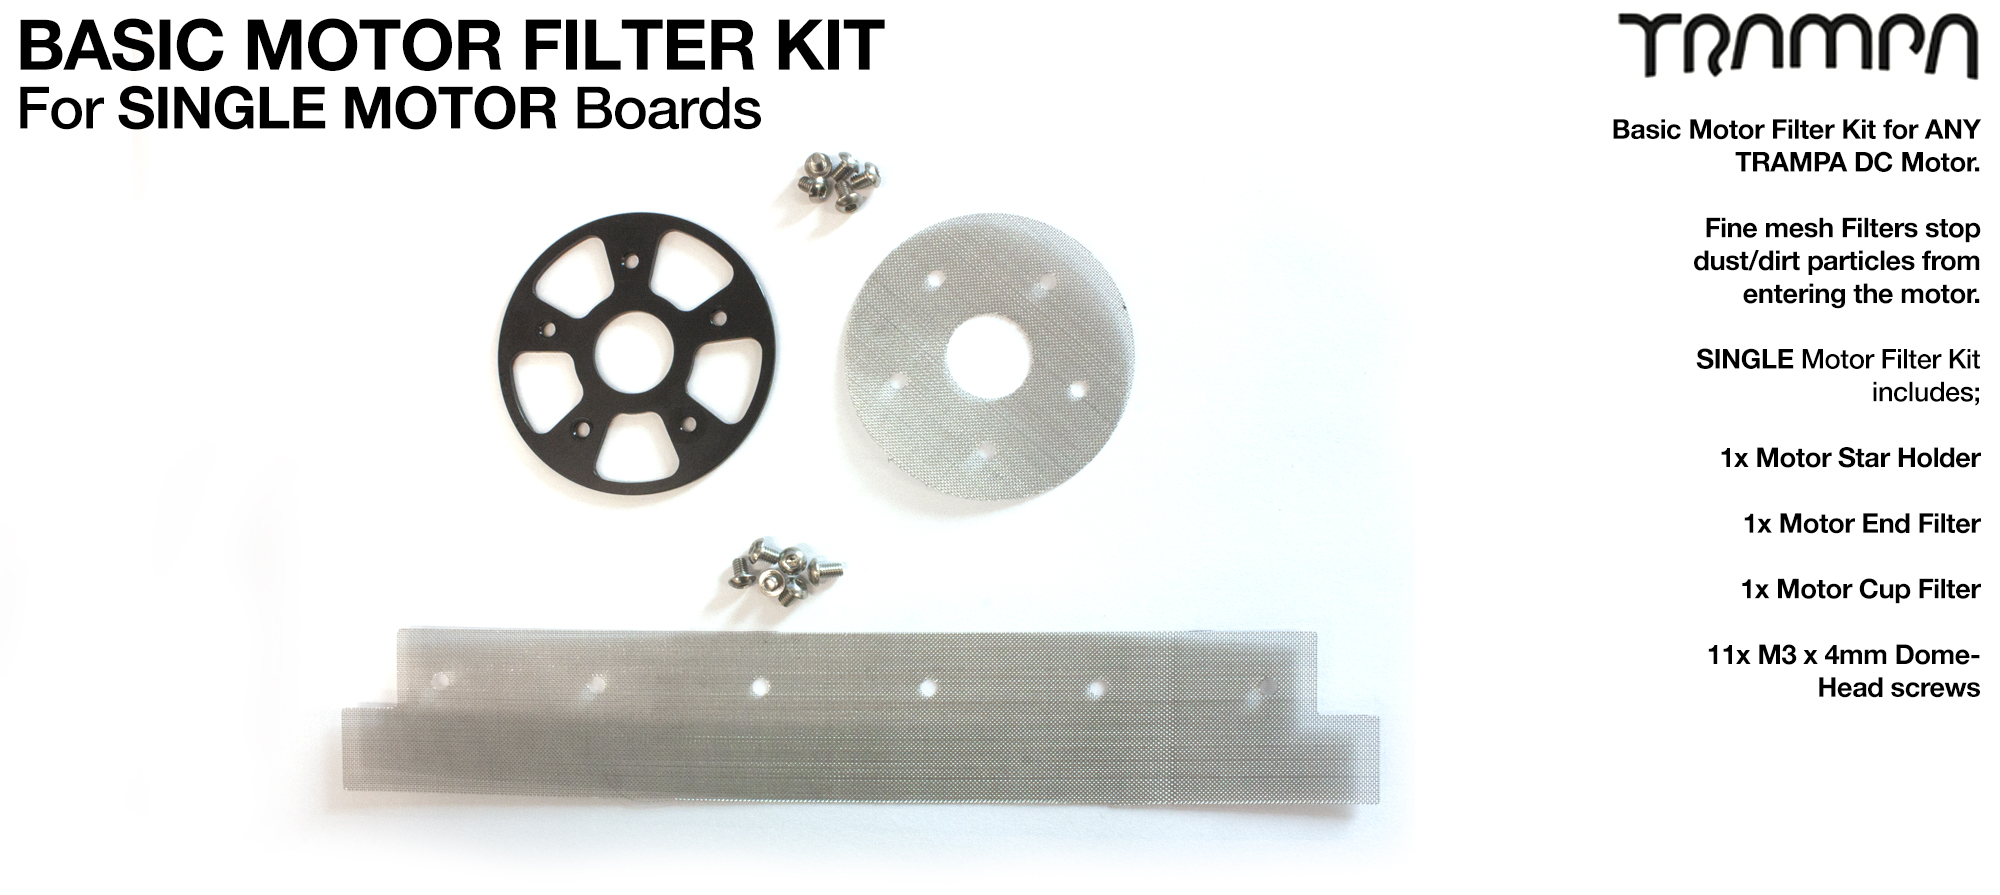 1x Stainless Steel Mesh Filter Kit with Bolts for TRAMPA Motors